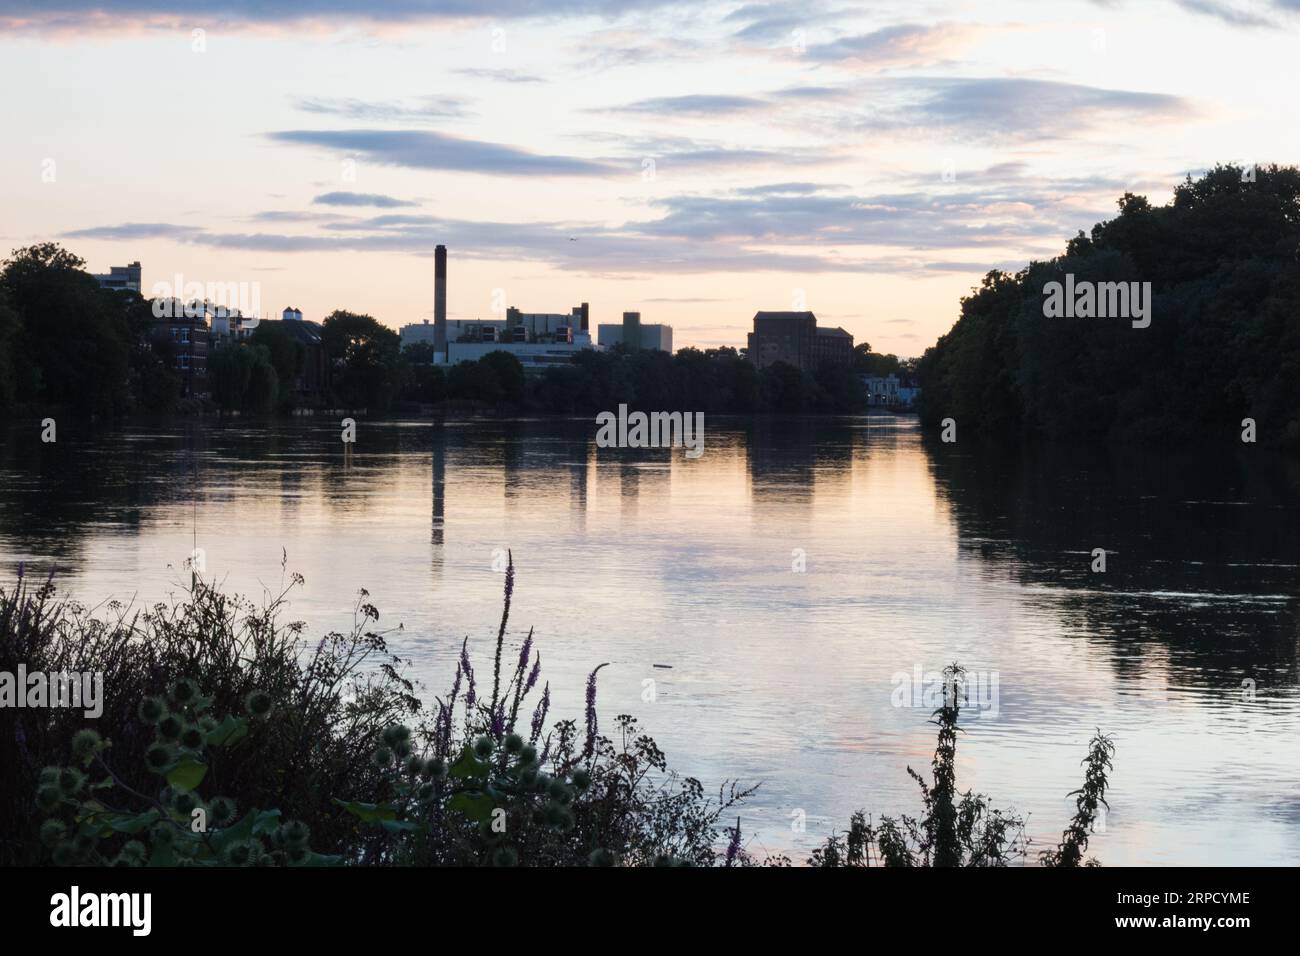 Dusk time reflections of the former Mortlake Brewery in the River Thames, Mortlake, London, England, U.K. Stock Photo